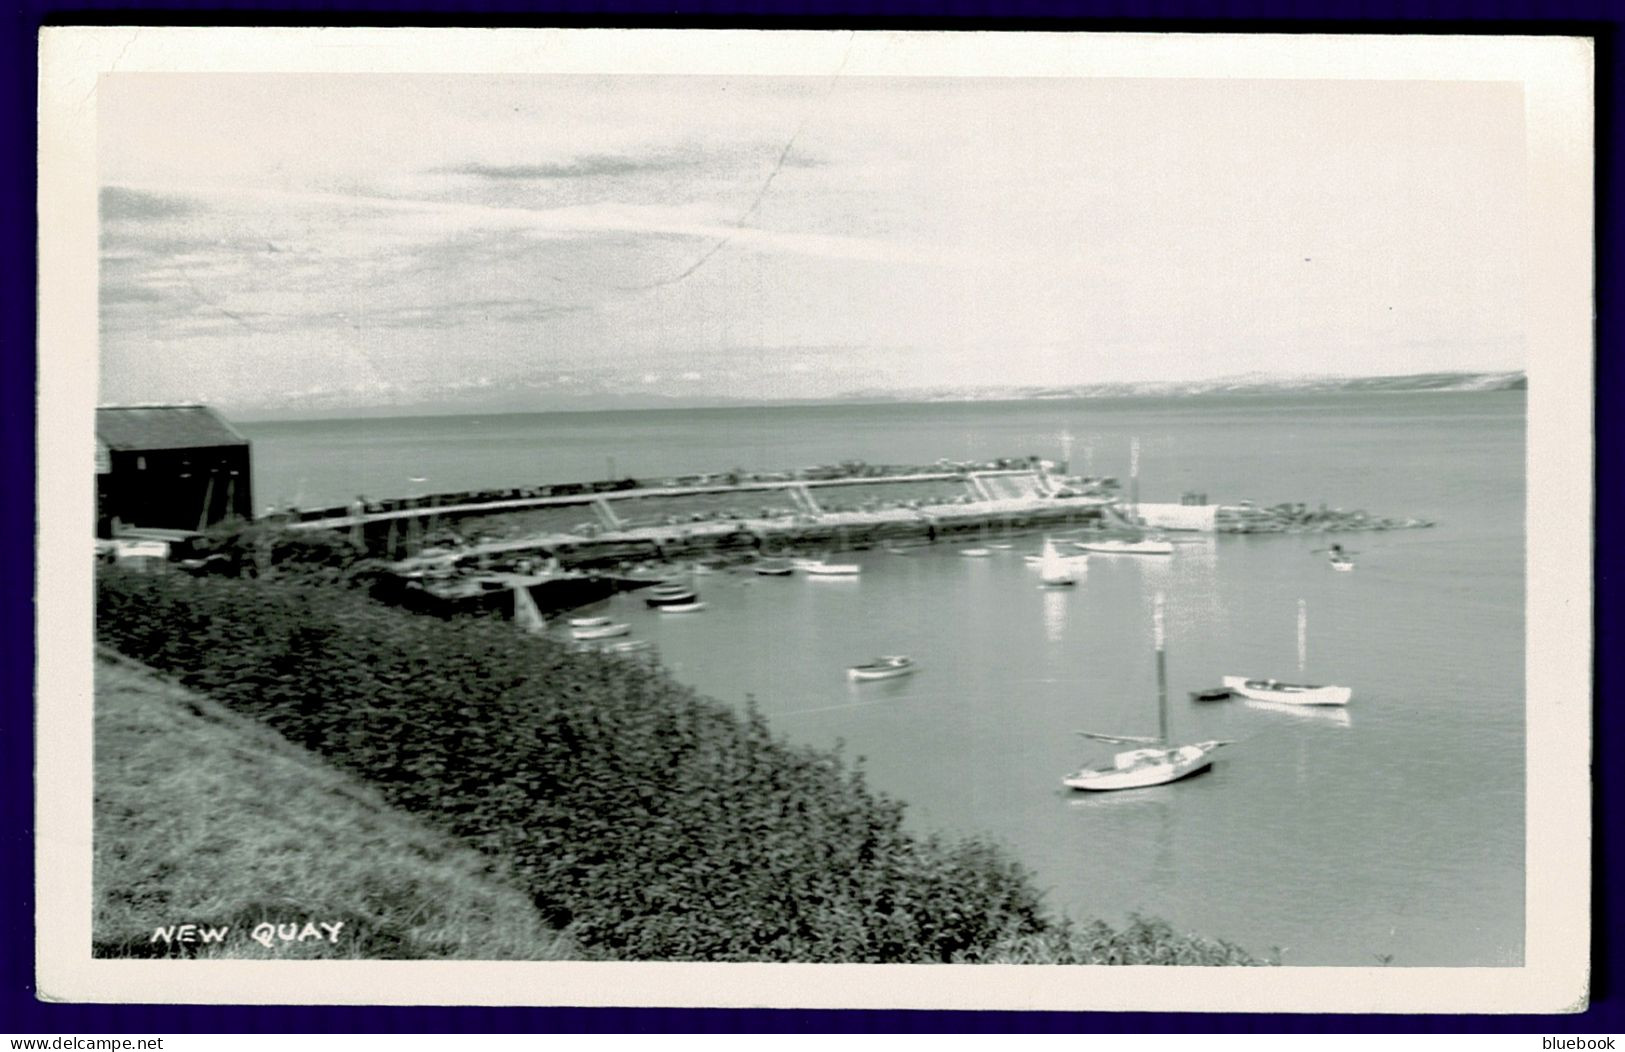 Ref 1642 - 1961 Real Photo Postcard - New Quay Harbour & Boats - Cardiganshire Wales - Cardiganshire